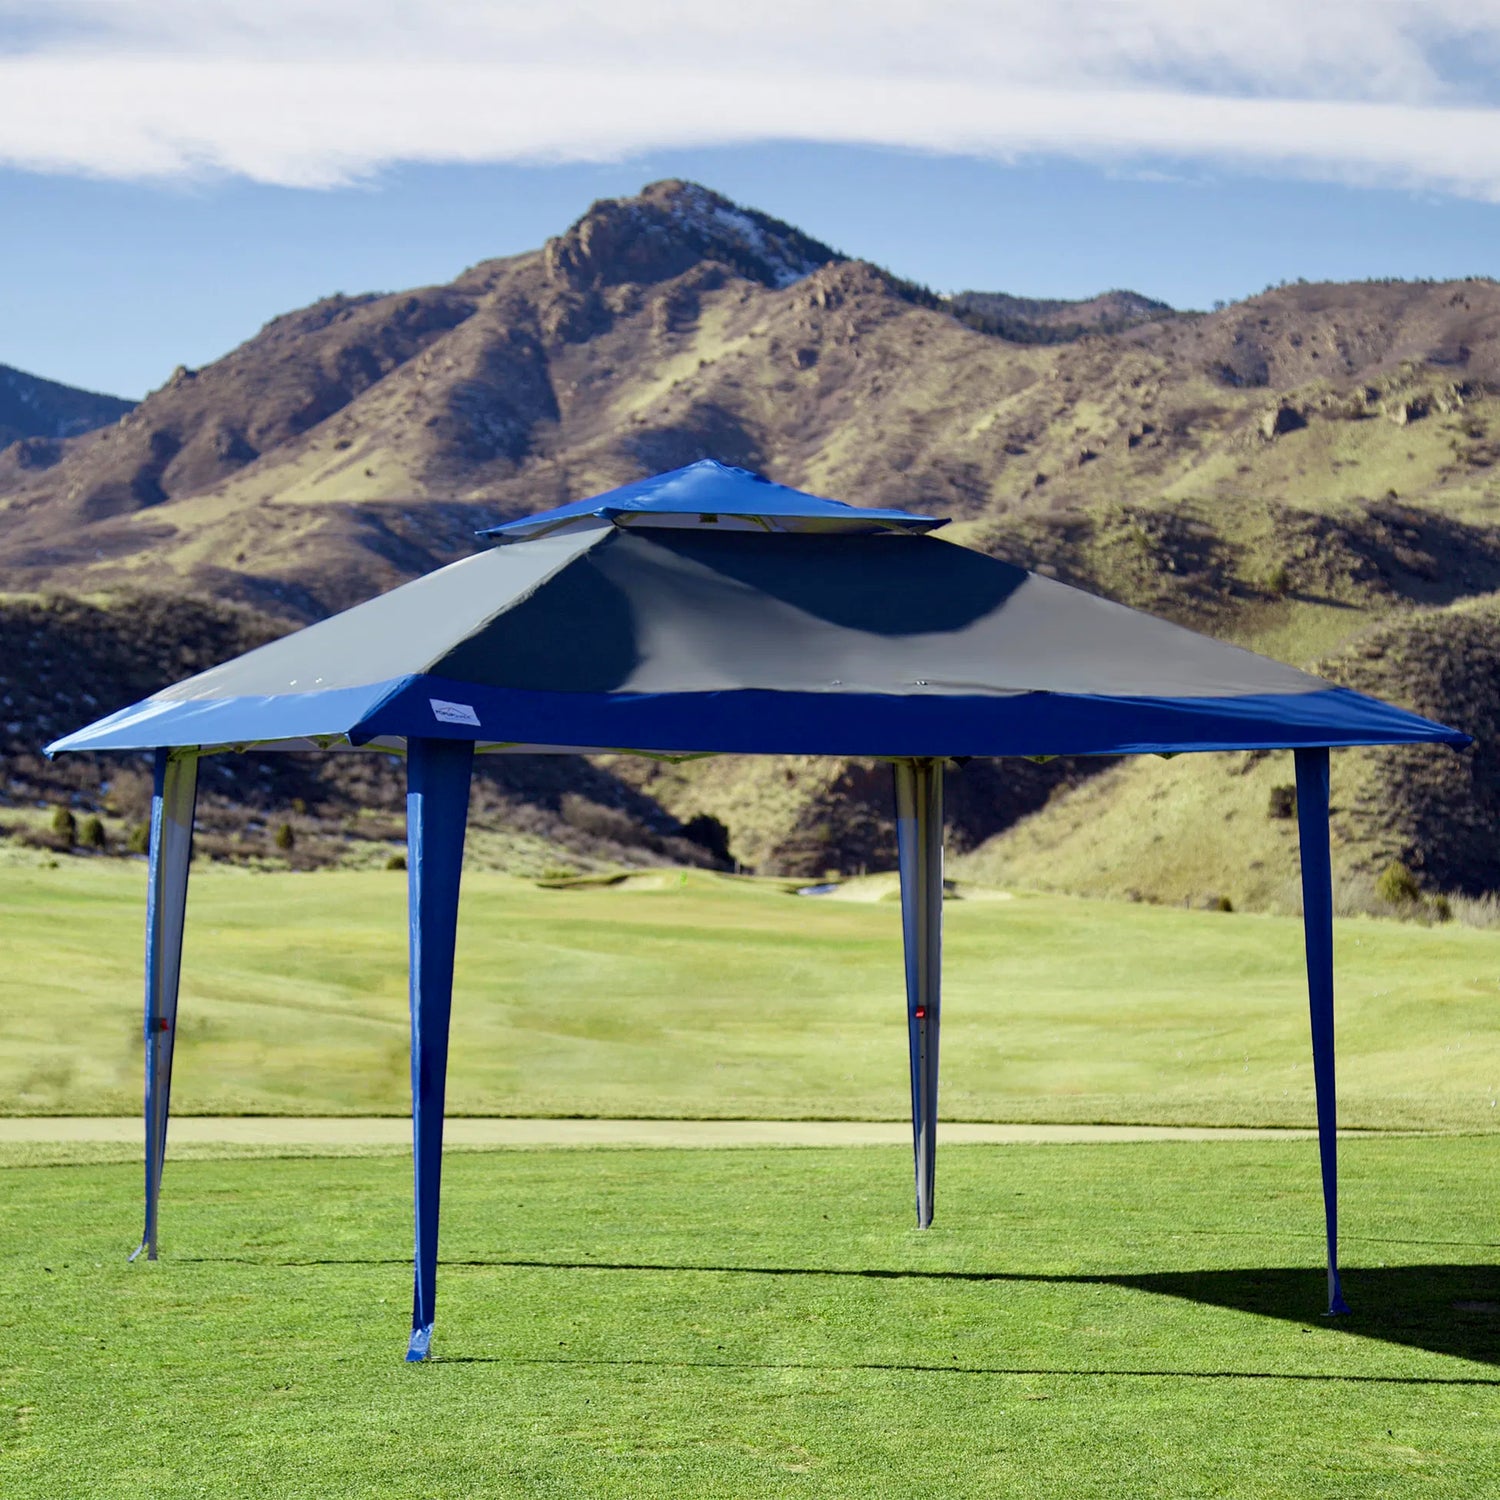 POPUPSHADE 13’x13’ Instant Canopy with POPLOCK Central-Hub Frame